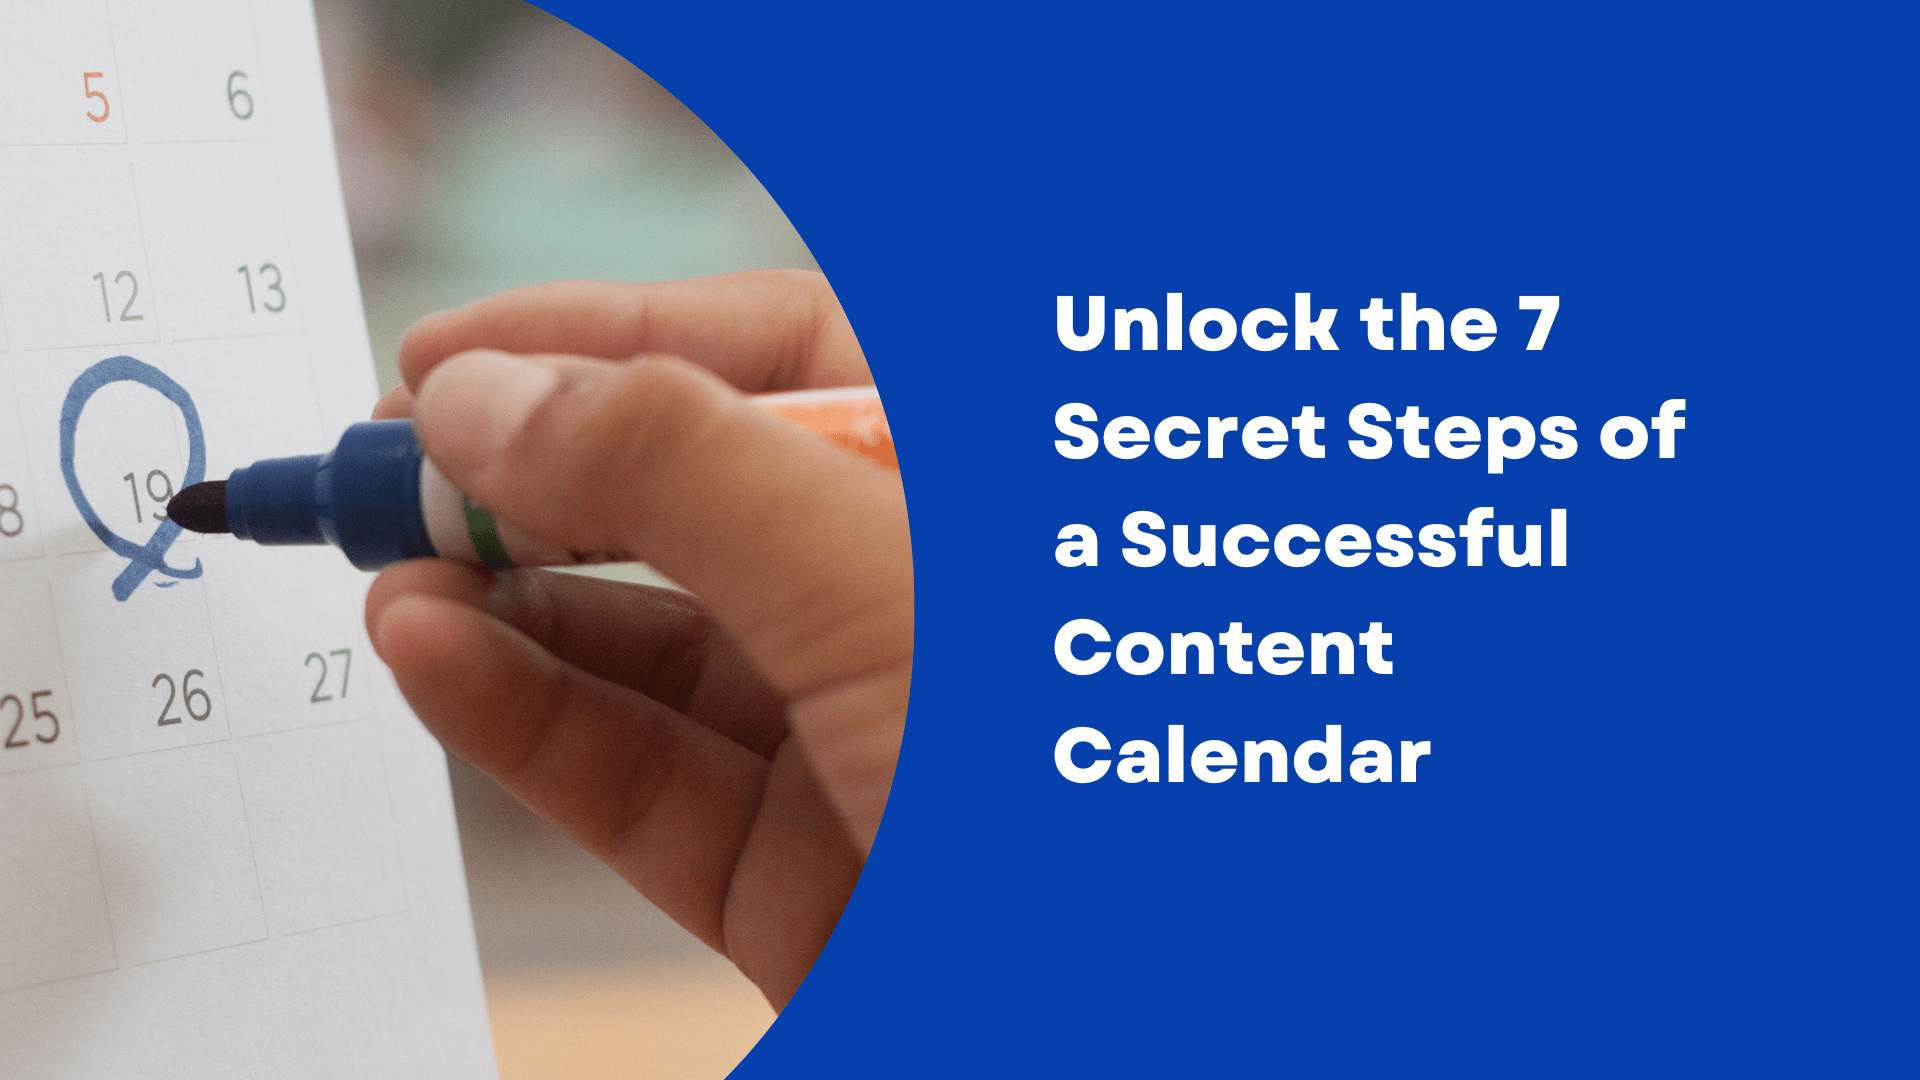 Unlock the 7 Secret Steps of a Successful Content Marketing Strategy